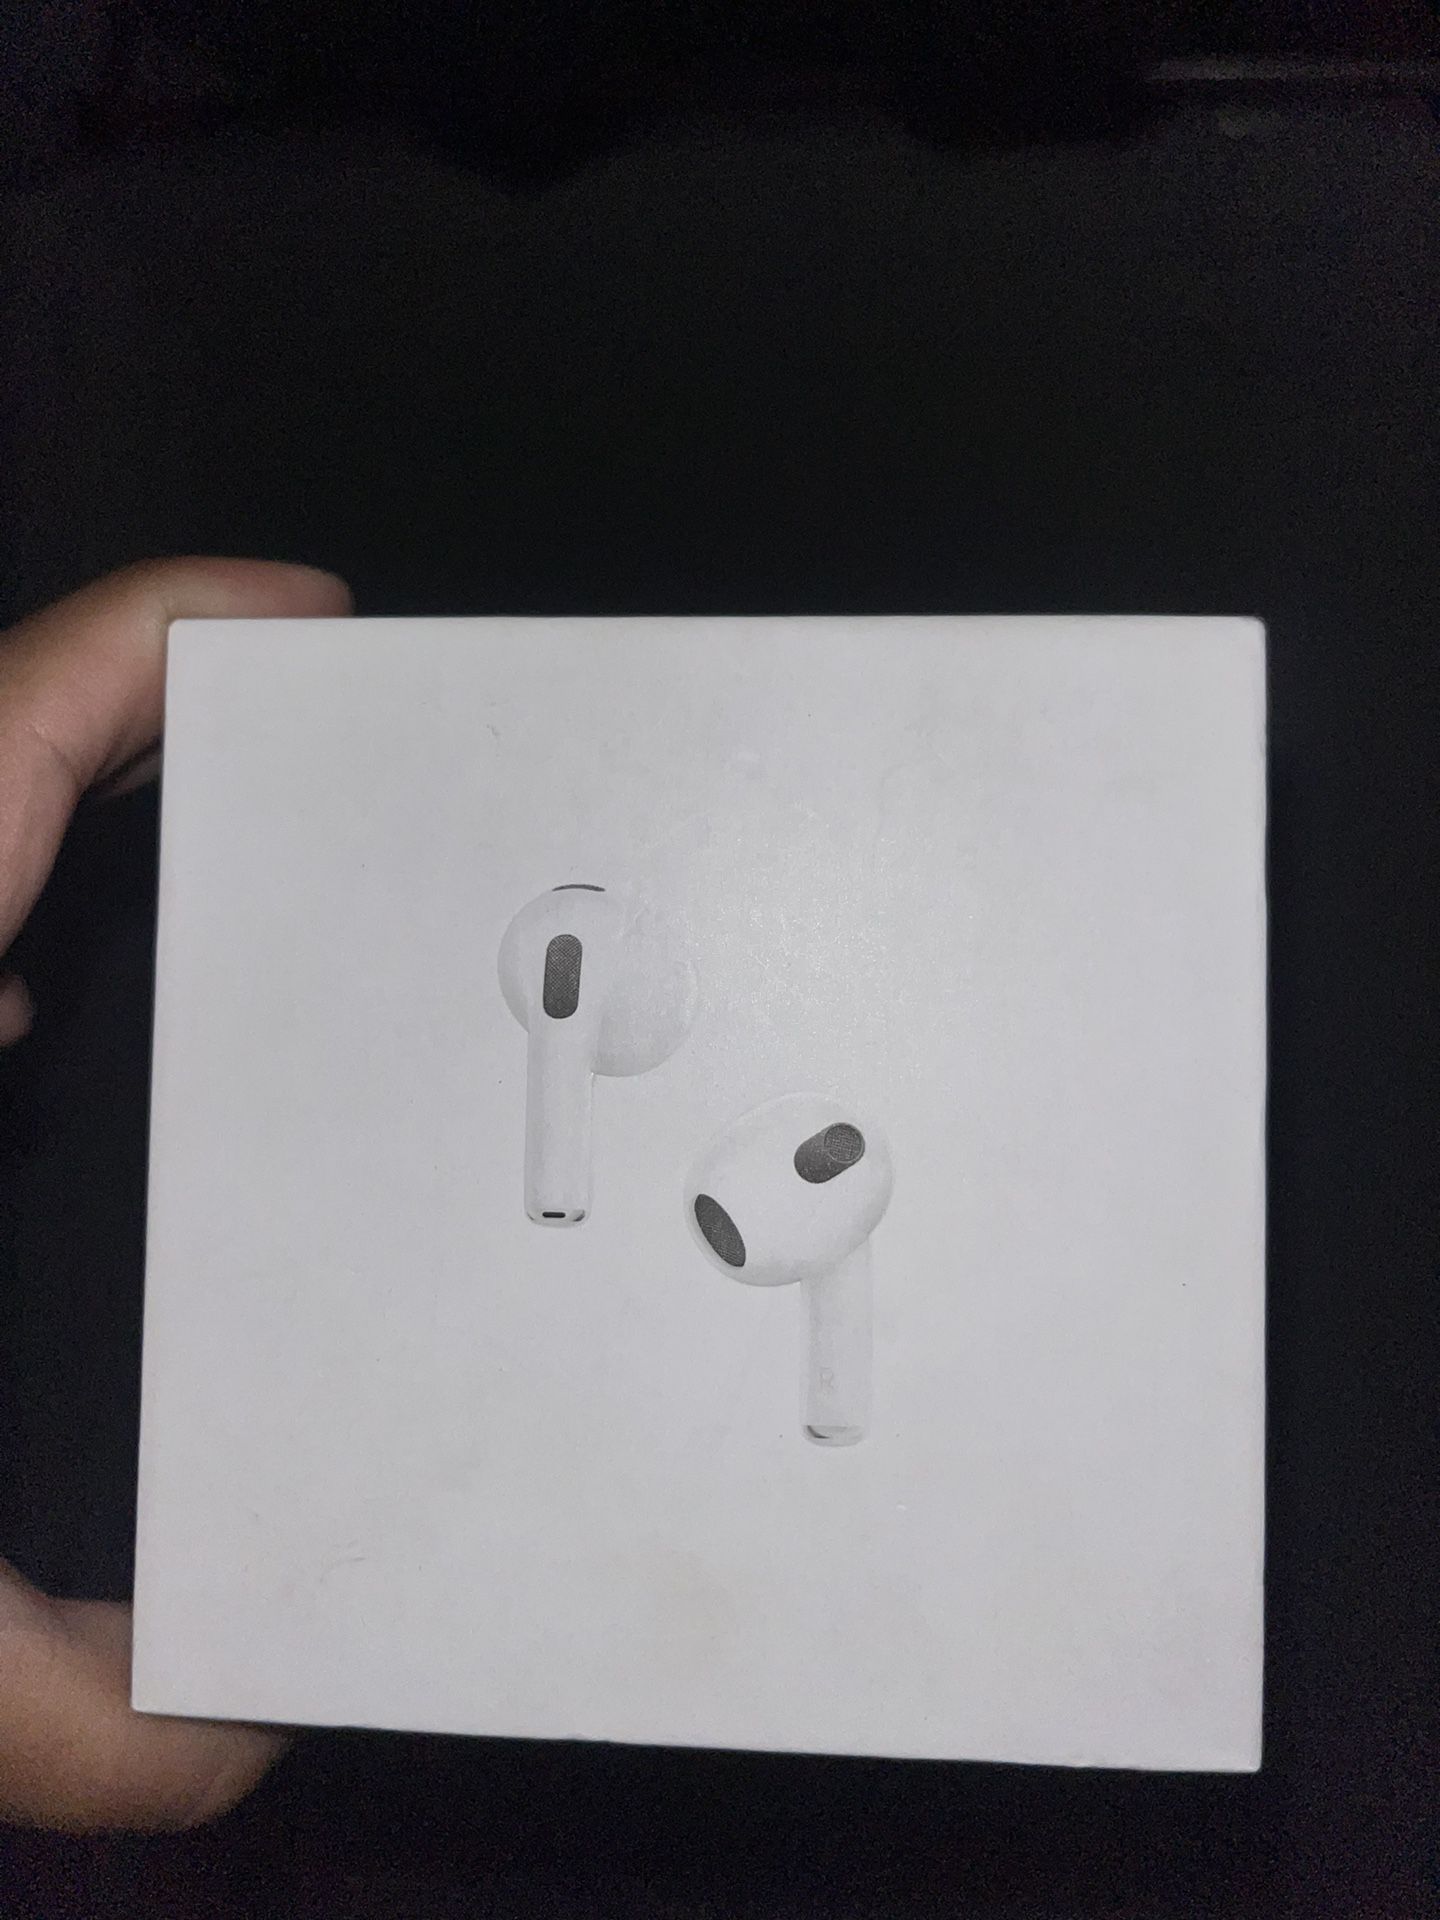 Apple AirPods (3rd generation) with MagSafe